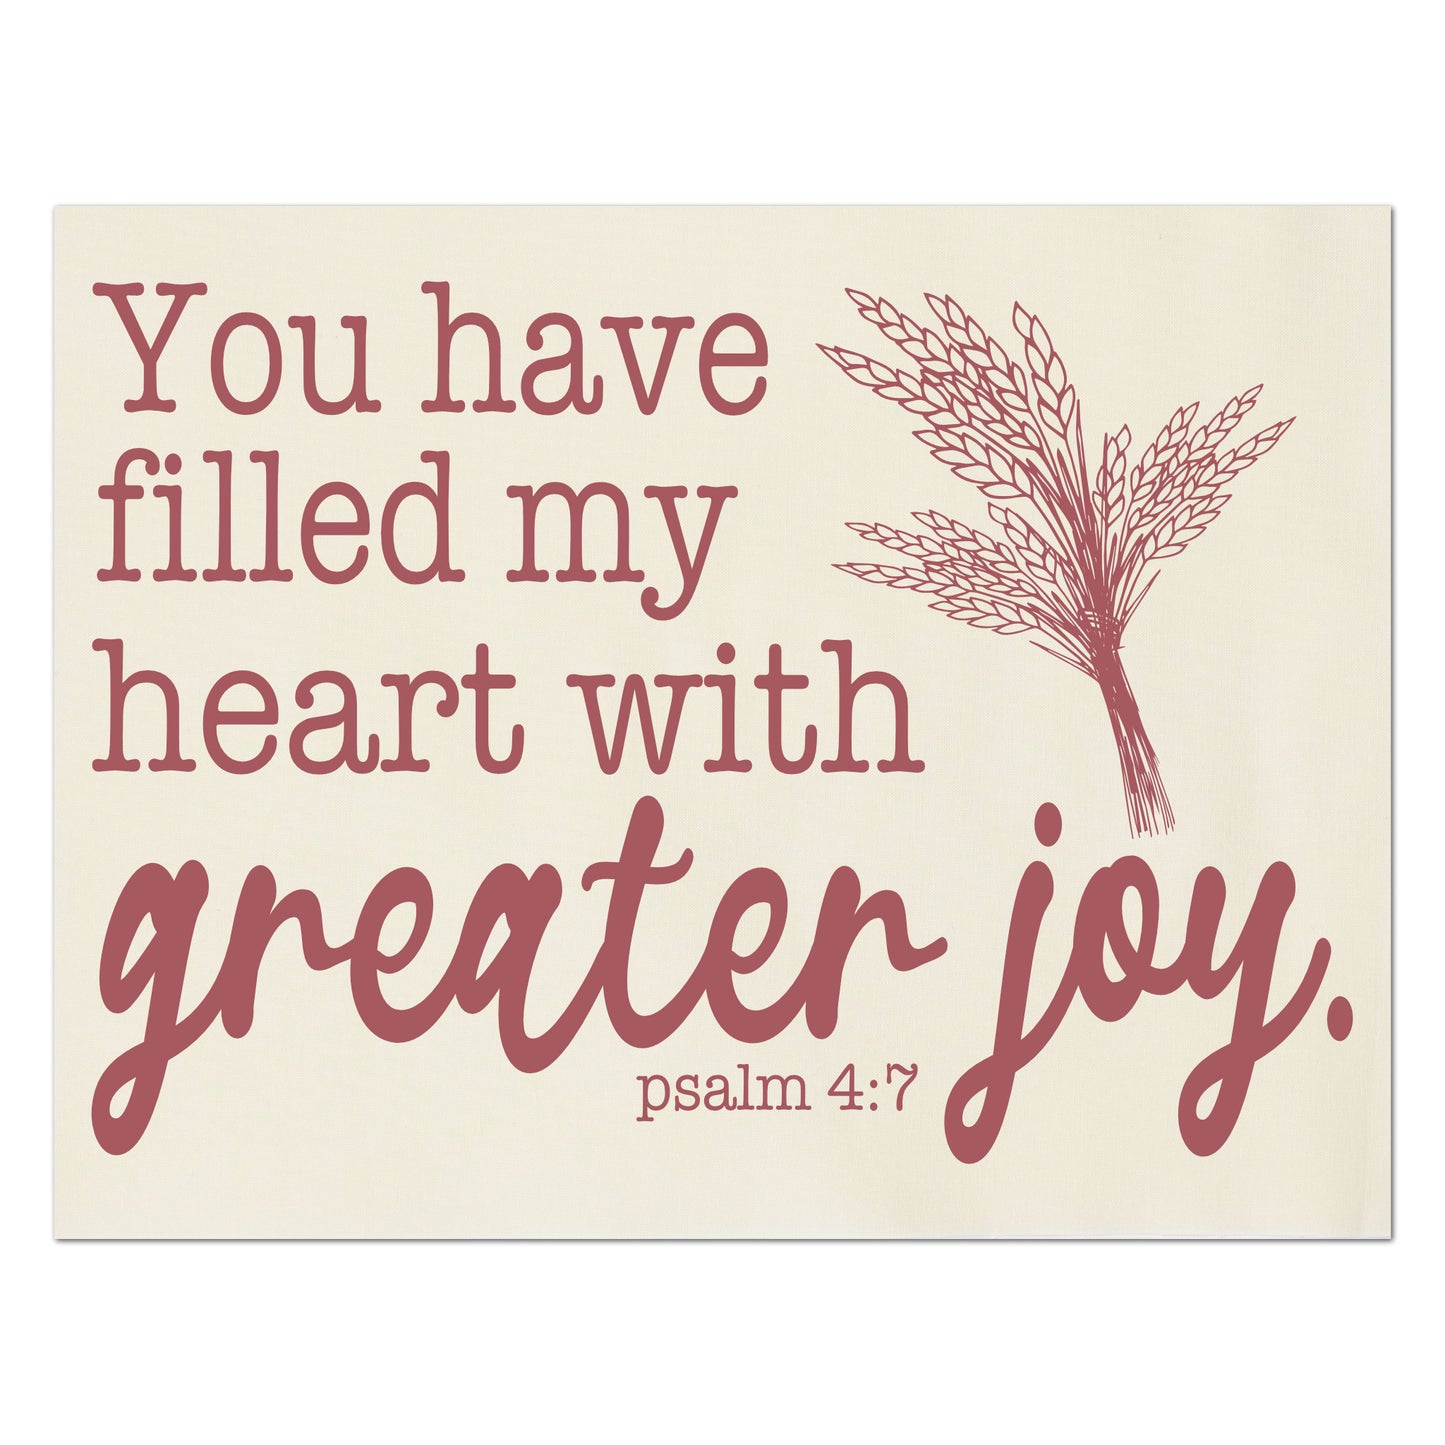 You have filled my heart with greater joy - Psalm 4 7, Scripture Fabric, Religious Fabric, Quilt Block, Wall Hanging, Fabric Panel Print